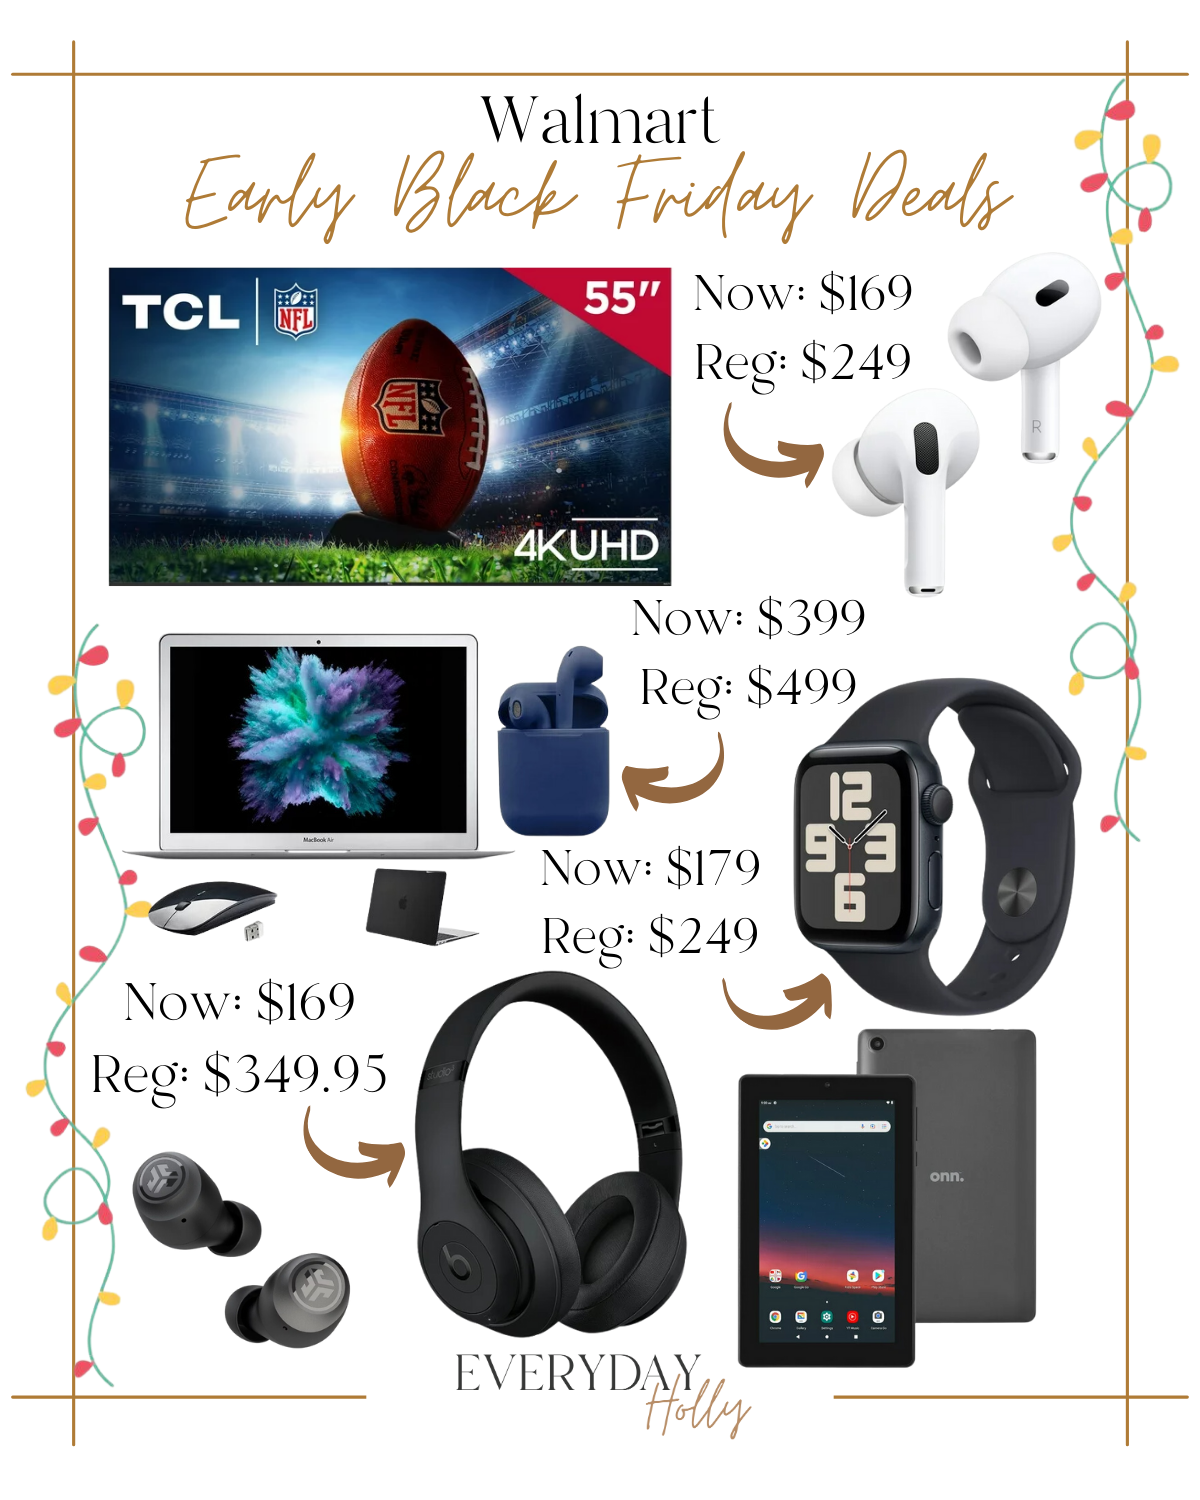 shop early black friday deals now | #shop #blackfriday #deals #earlyblackfriday #walmart #headphones #tablet #laptop #applewatch #airpods #tv